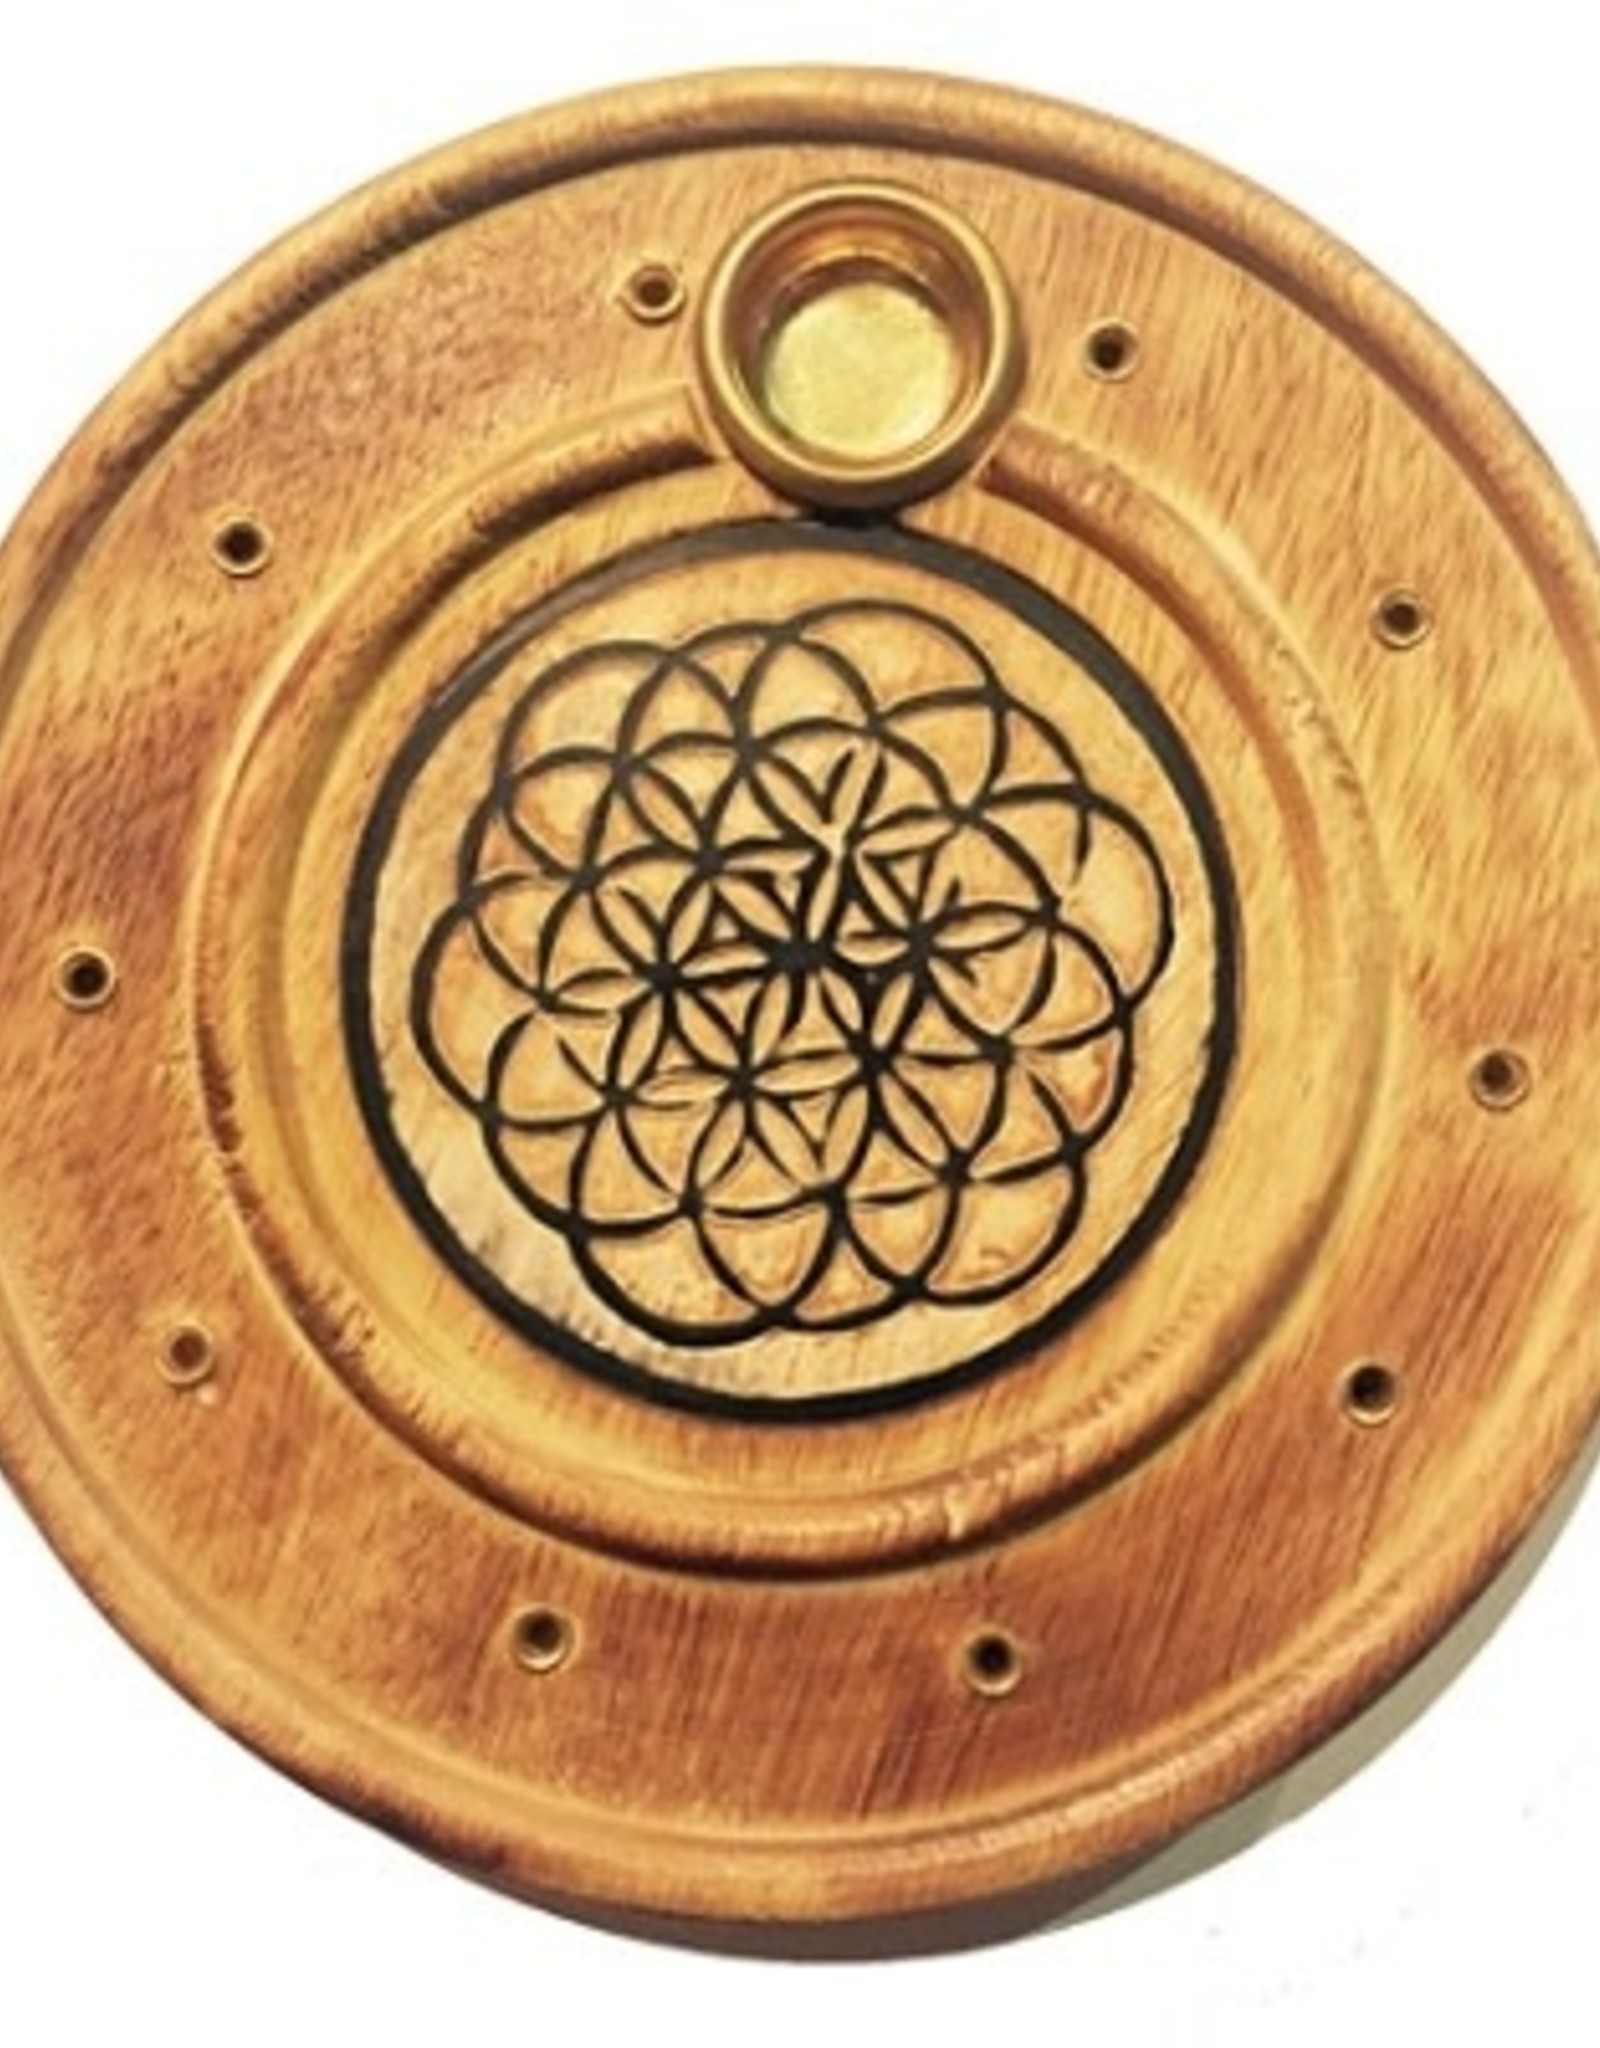 Flower of Life Wood Incense Holder Sticks and Cones